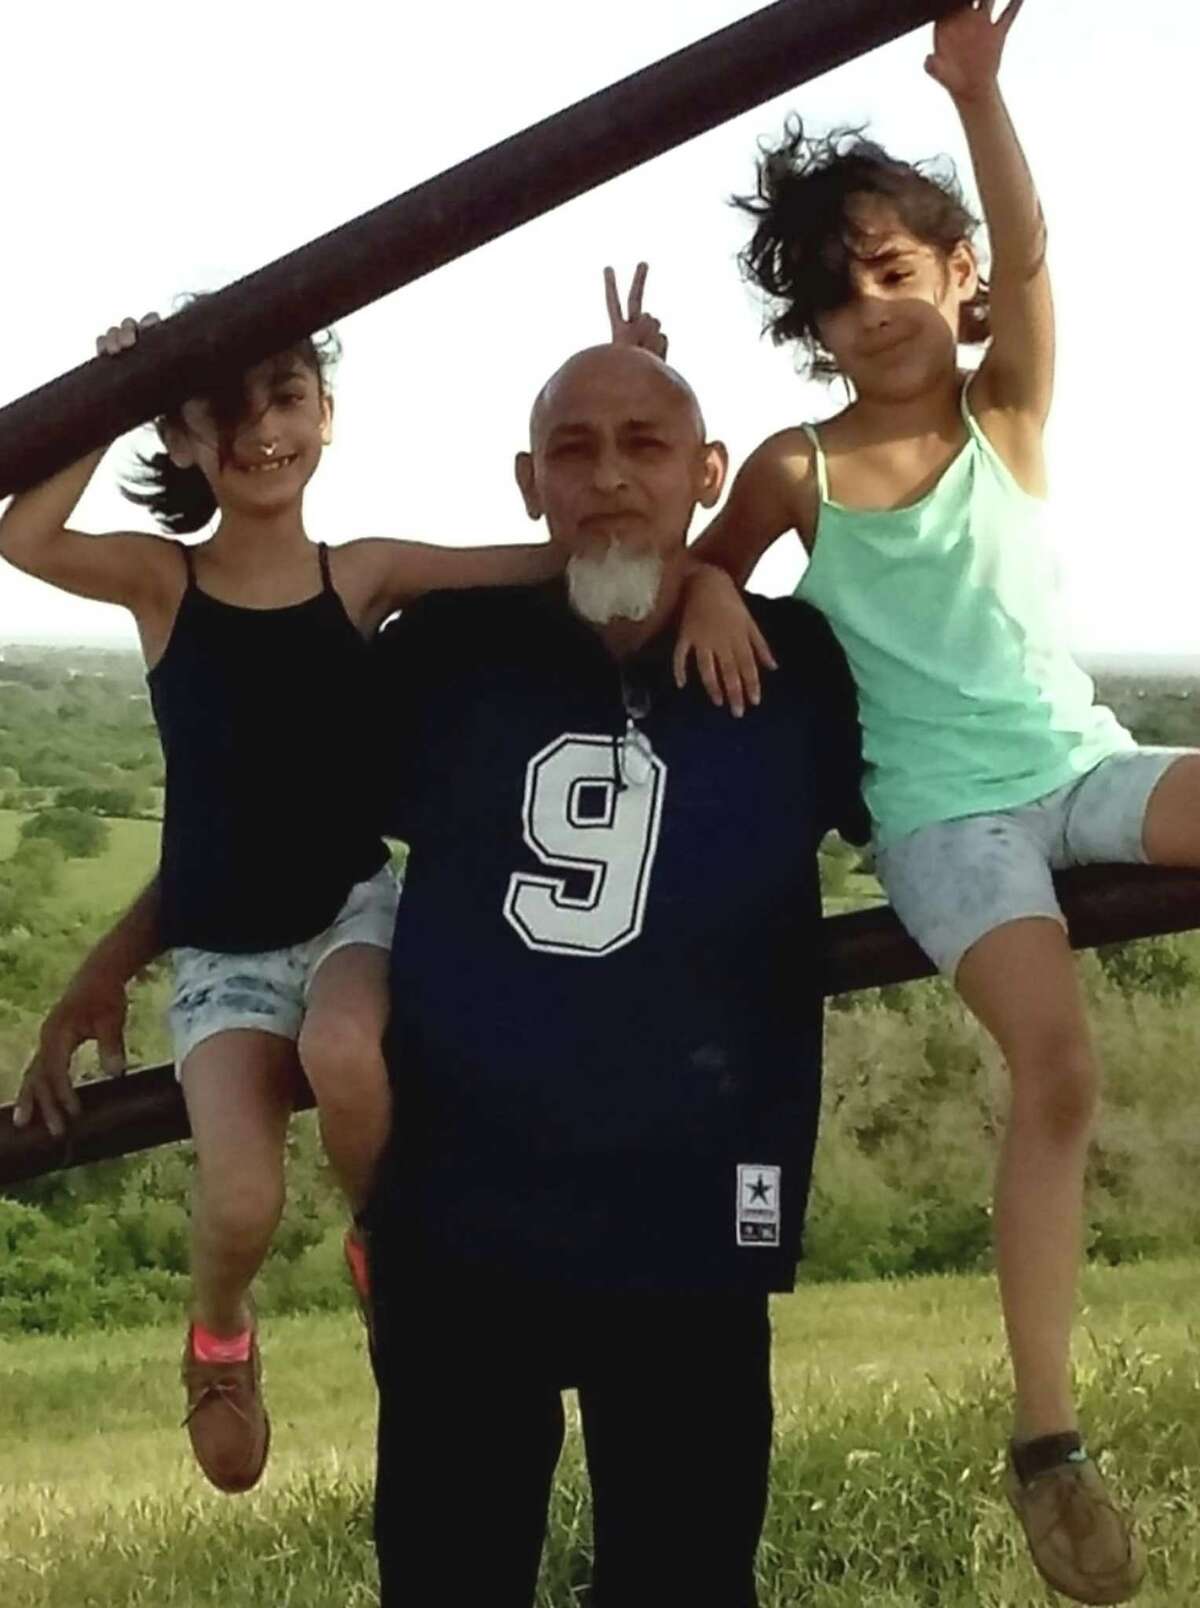 Left to right, Leann Cavazos, 9, father Thomas G. Cavazos, 56, and Healey Cavazos, 10, all died from carbon monoxide poisoning. They were discovered in their home Monday.